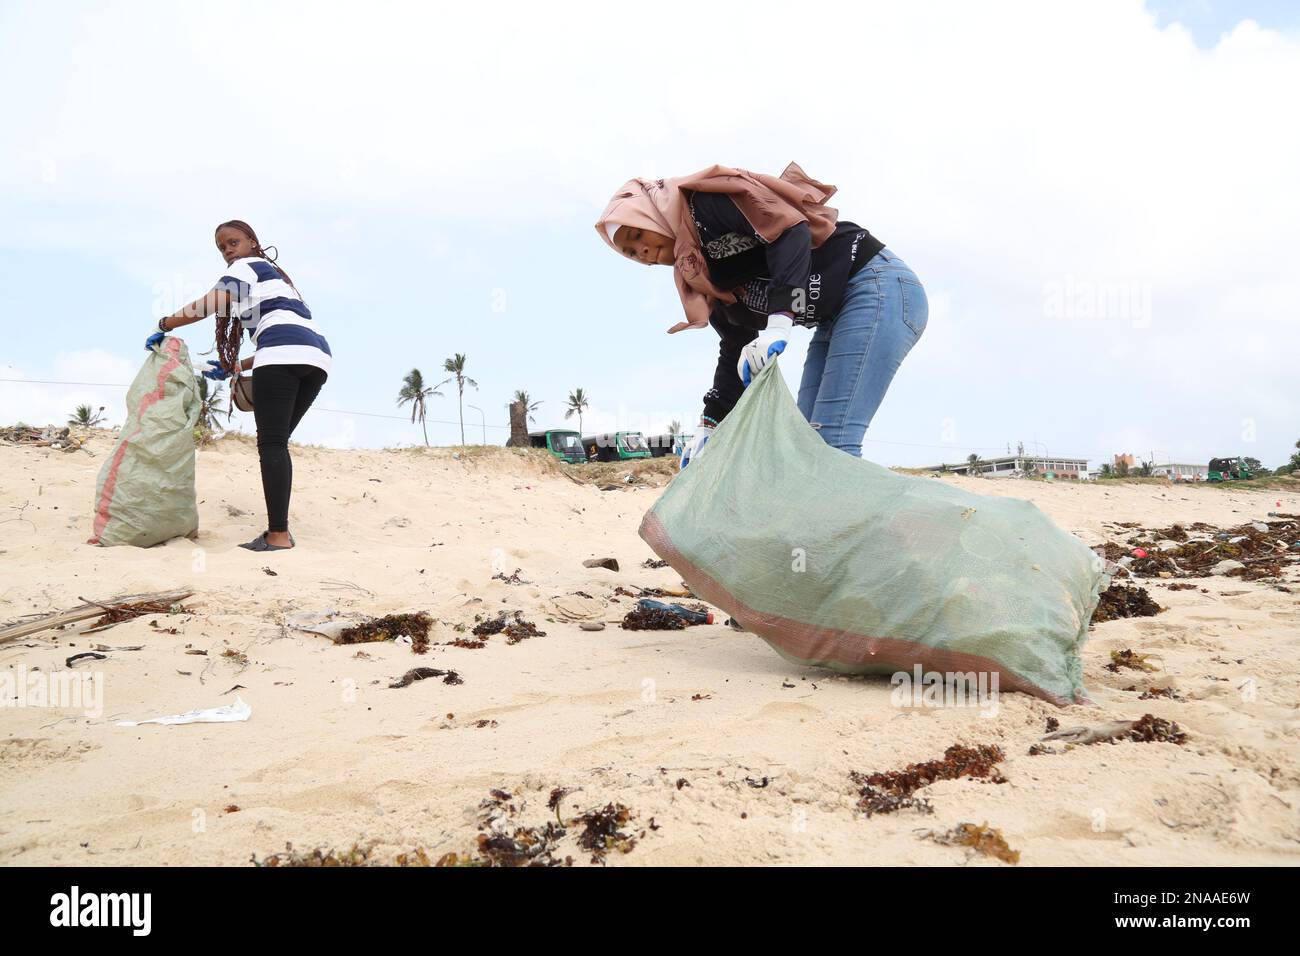 Dar Es Salaam, Tanzania. 7th Feb, 2023. People clean up waste on a beach in Dar es Salaam, Tanzania, Feb. 7, 2023. TO GO WITH 'Tanzania's waste collection campaign seeks to promote sustainable tourism' Credit: Herman Emmanuel/Xinhua/Alamy Live News Stock Photo